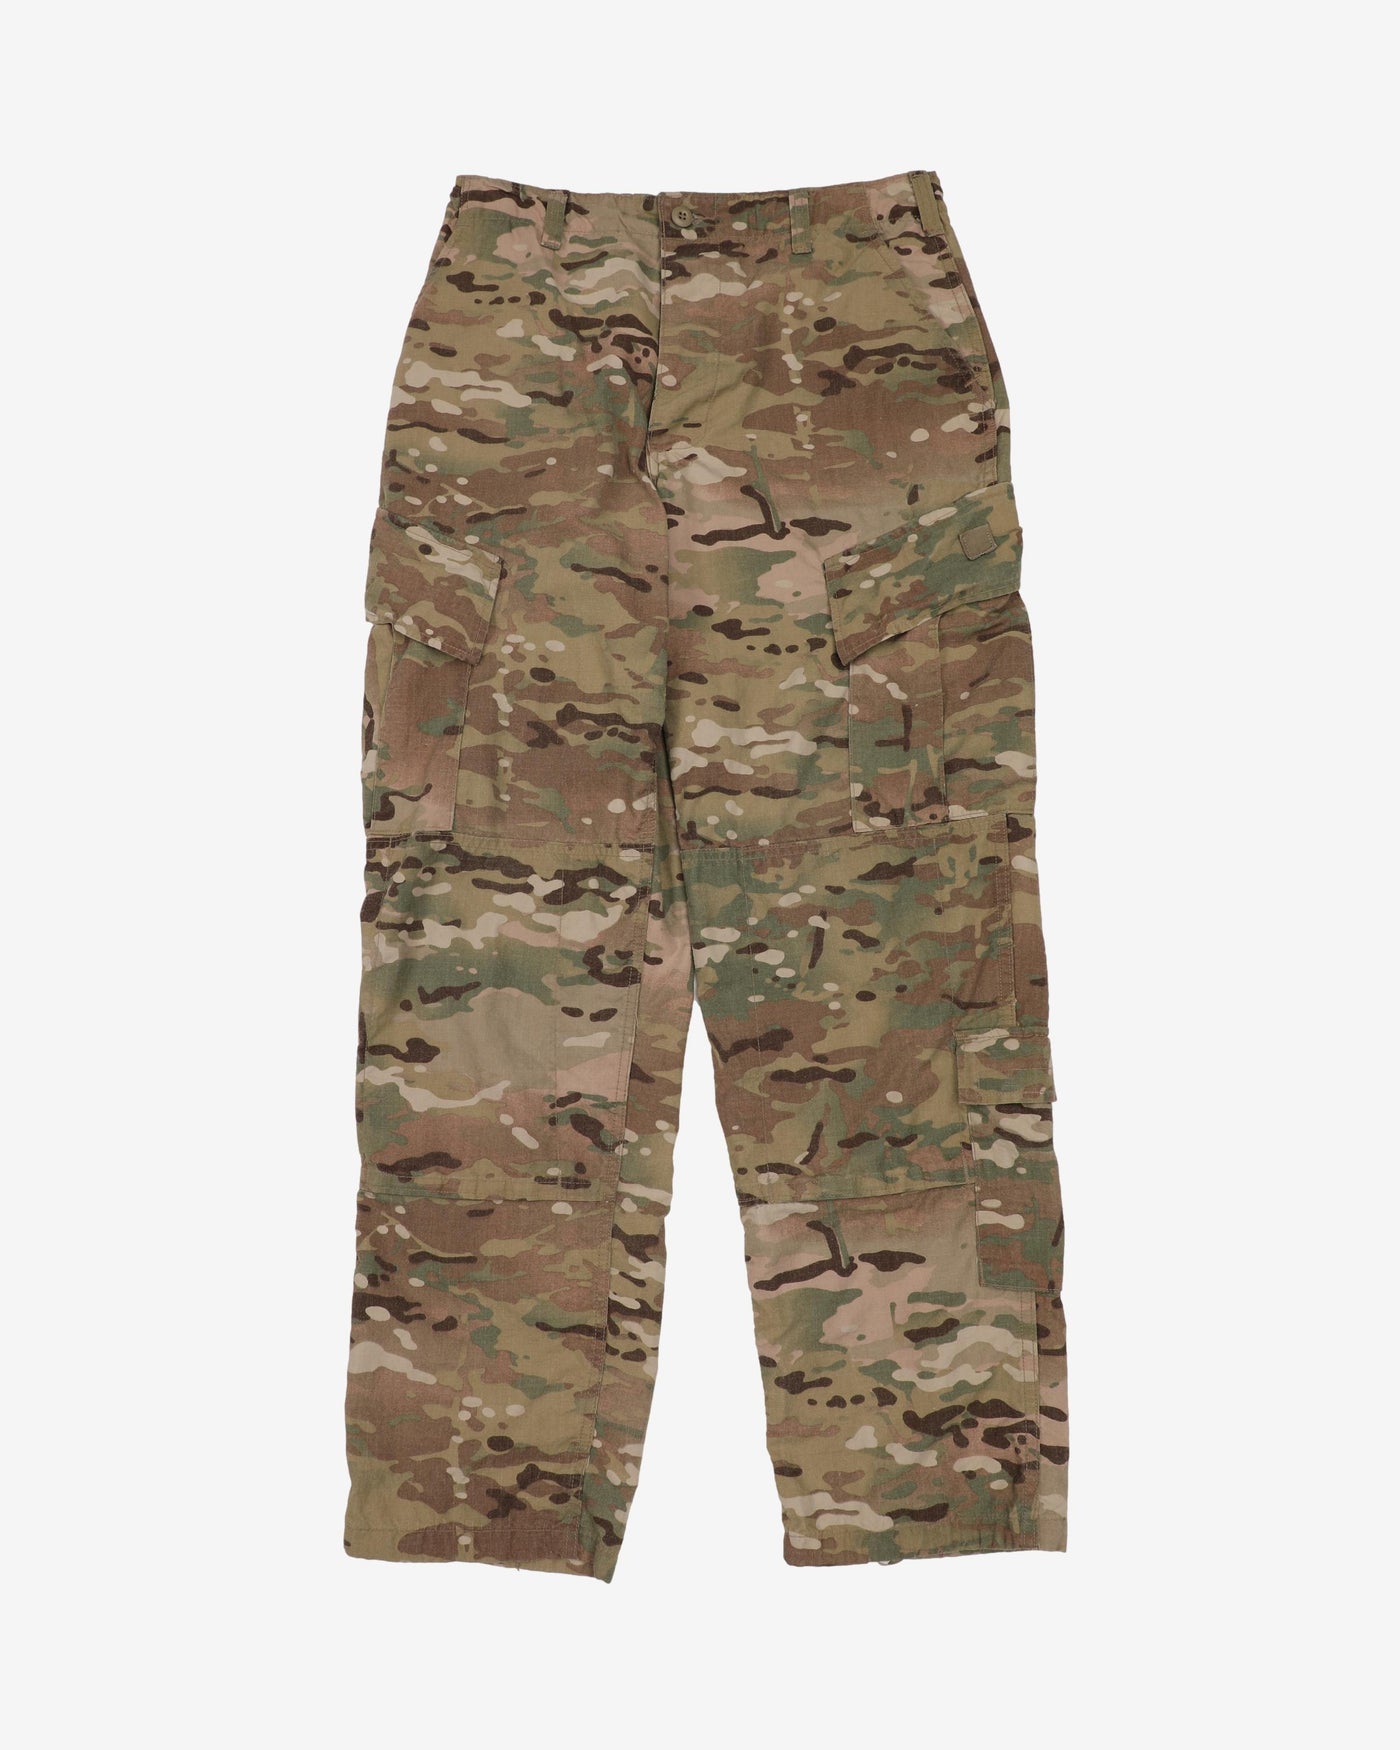 2010s US Army Multicam Combat Trousers - 32x33